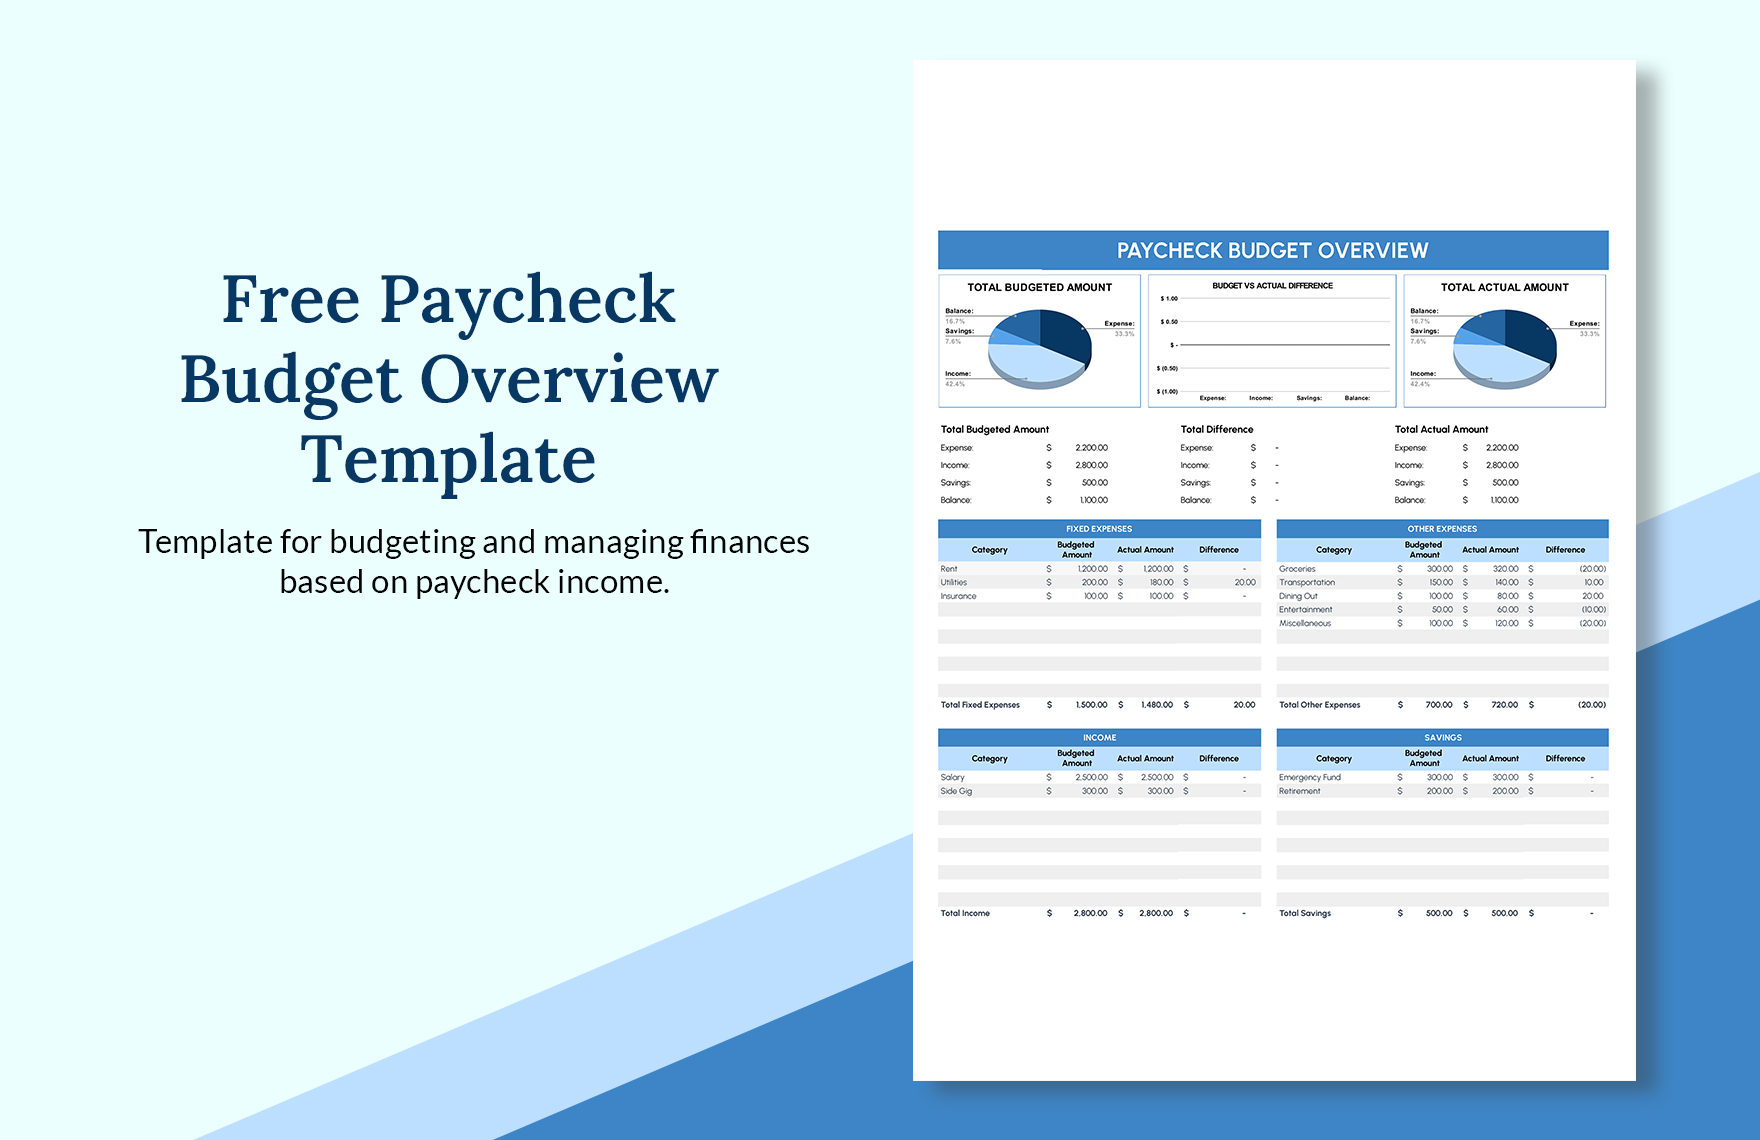 Paycheck Budget Overview Template in Excel Google Sheets Download